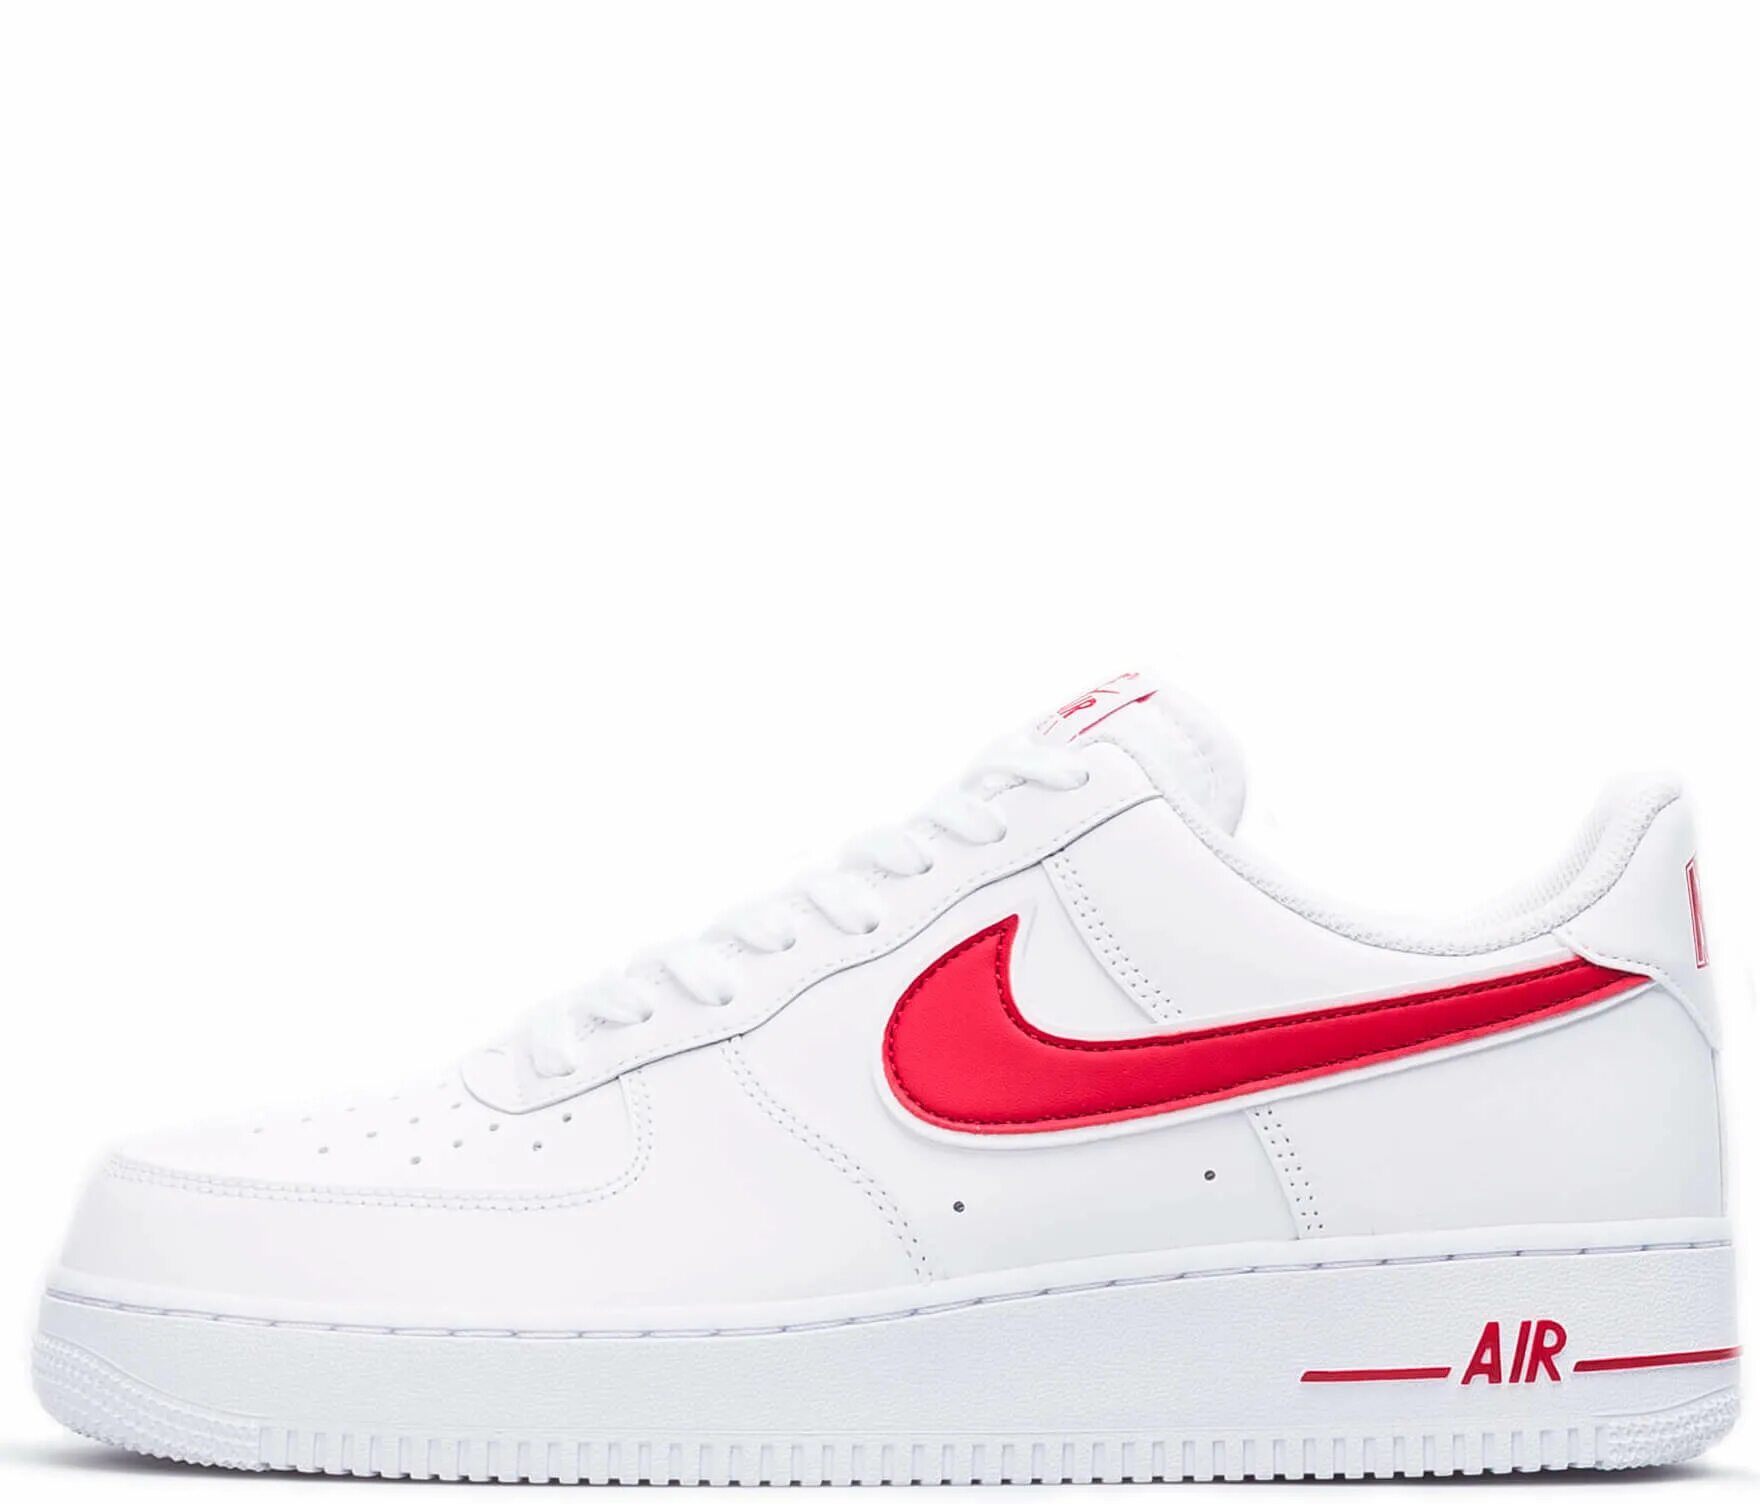 Nike Air Force 1 Low White Red. Nike Air Force 1 lv8 White/Red. Nike Air Force 1 White Red. Nike Air Force 1 lv8 White.